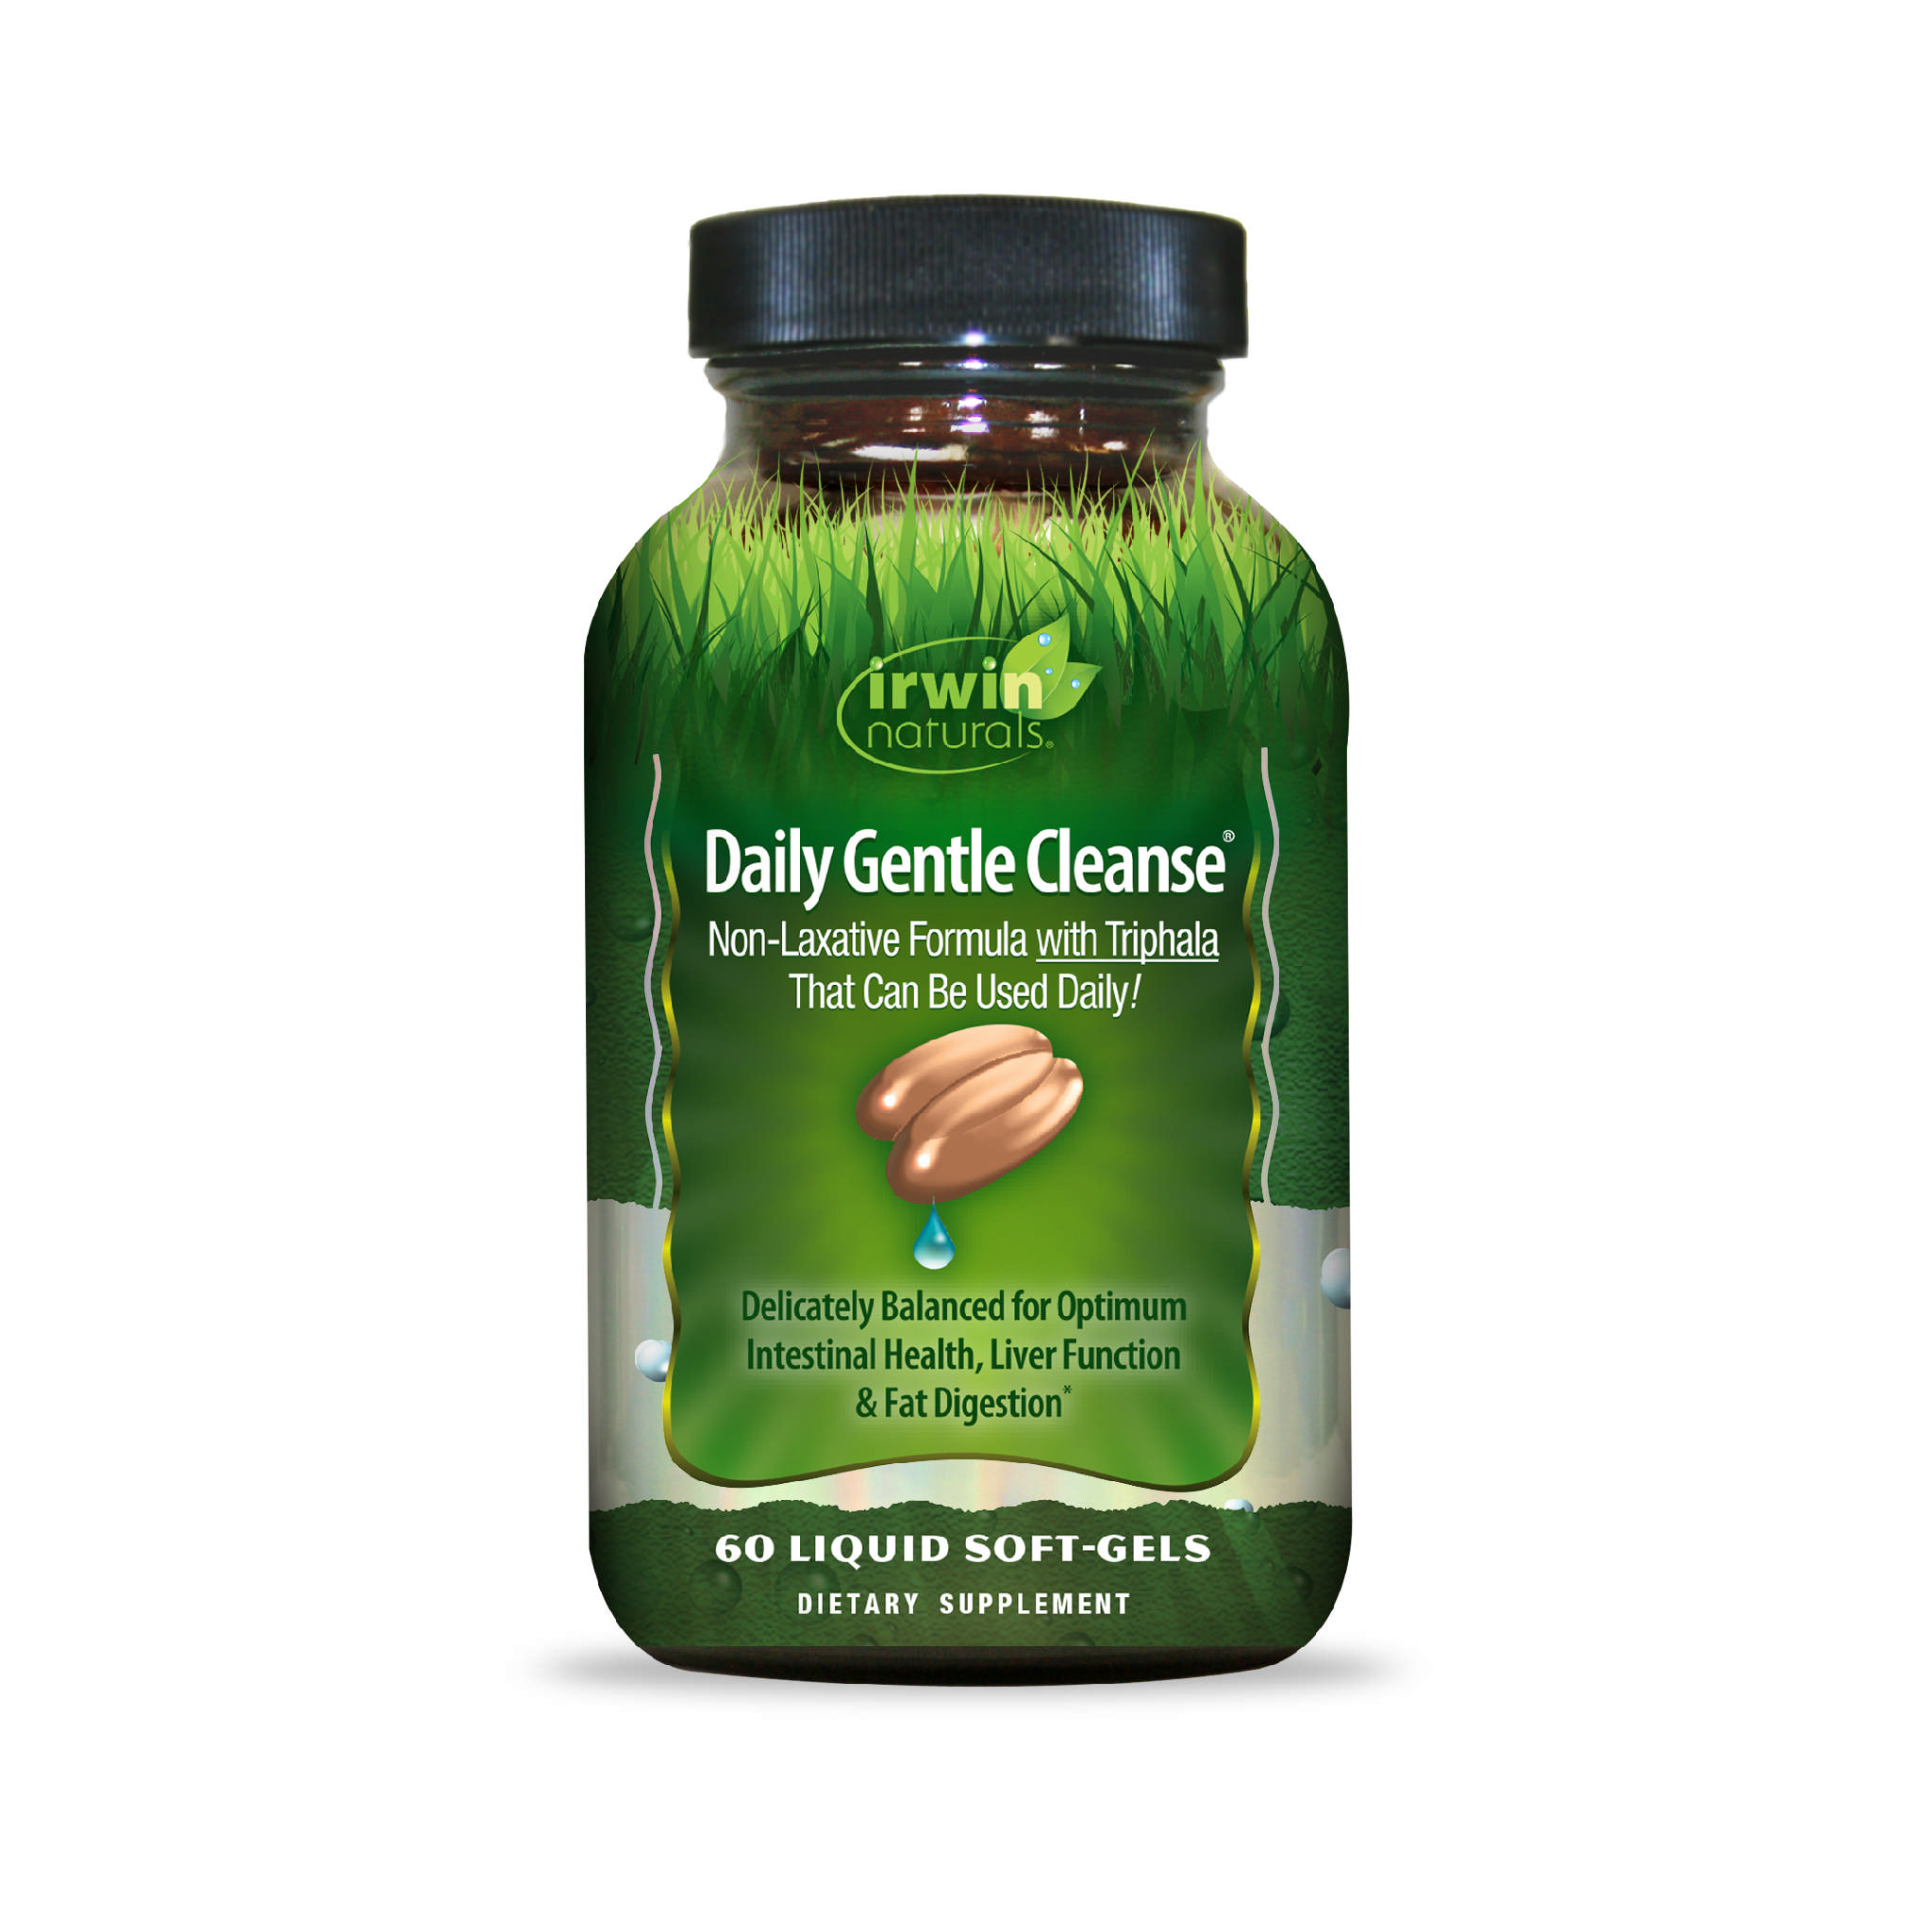 Irwin Naturals - Daily Gentle Cleanse